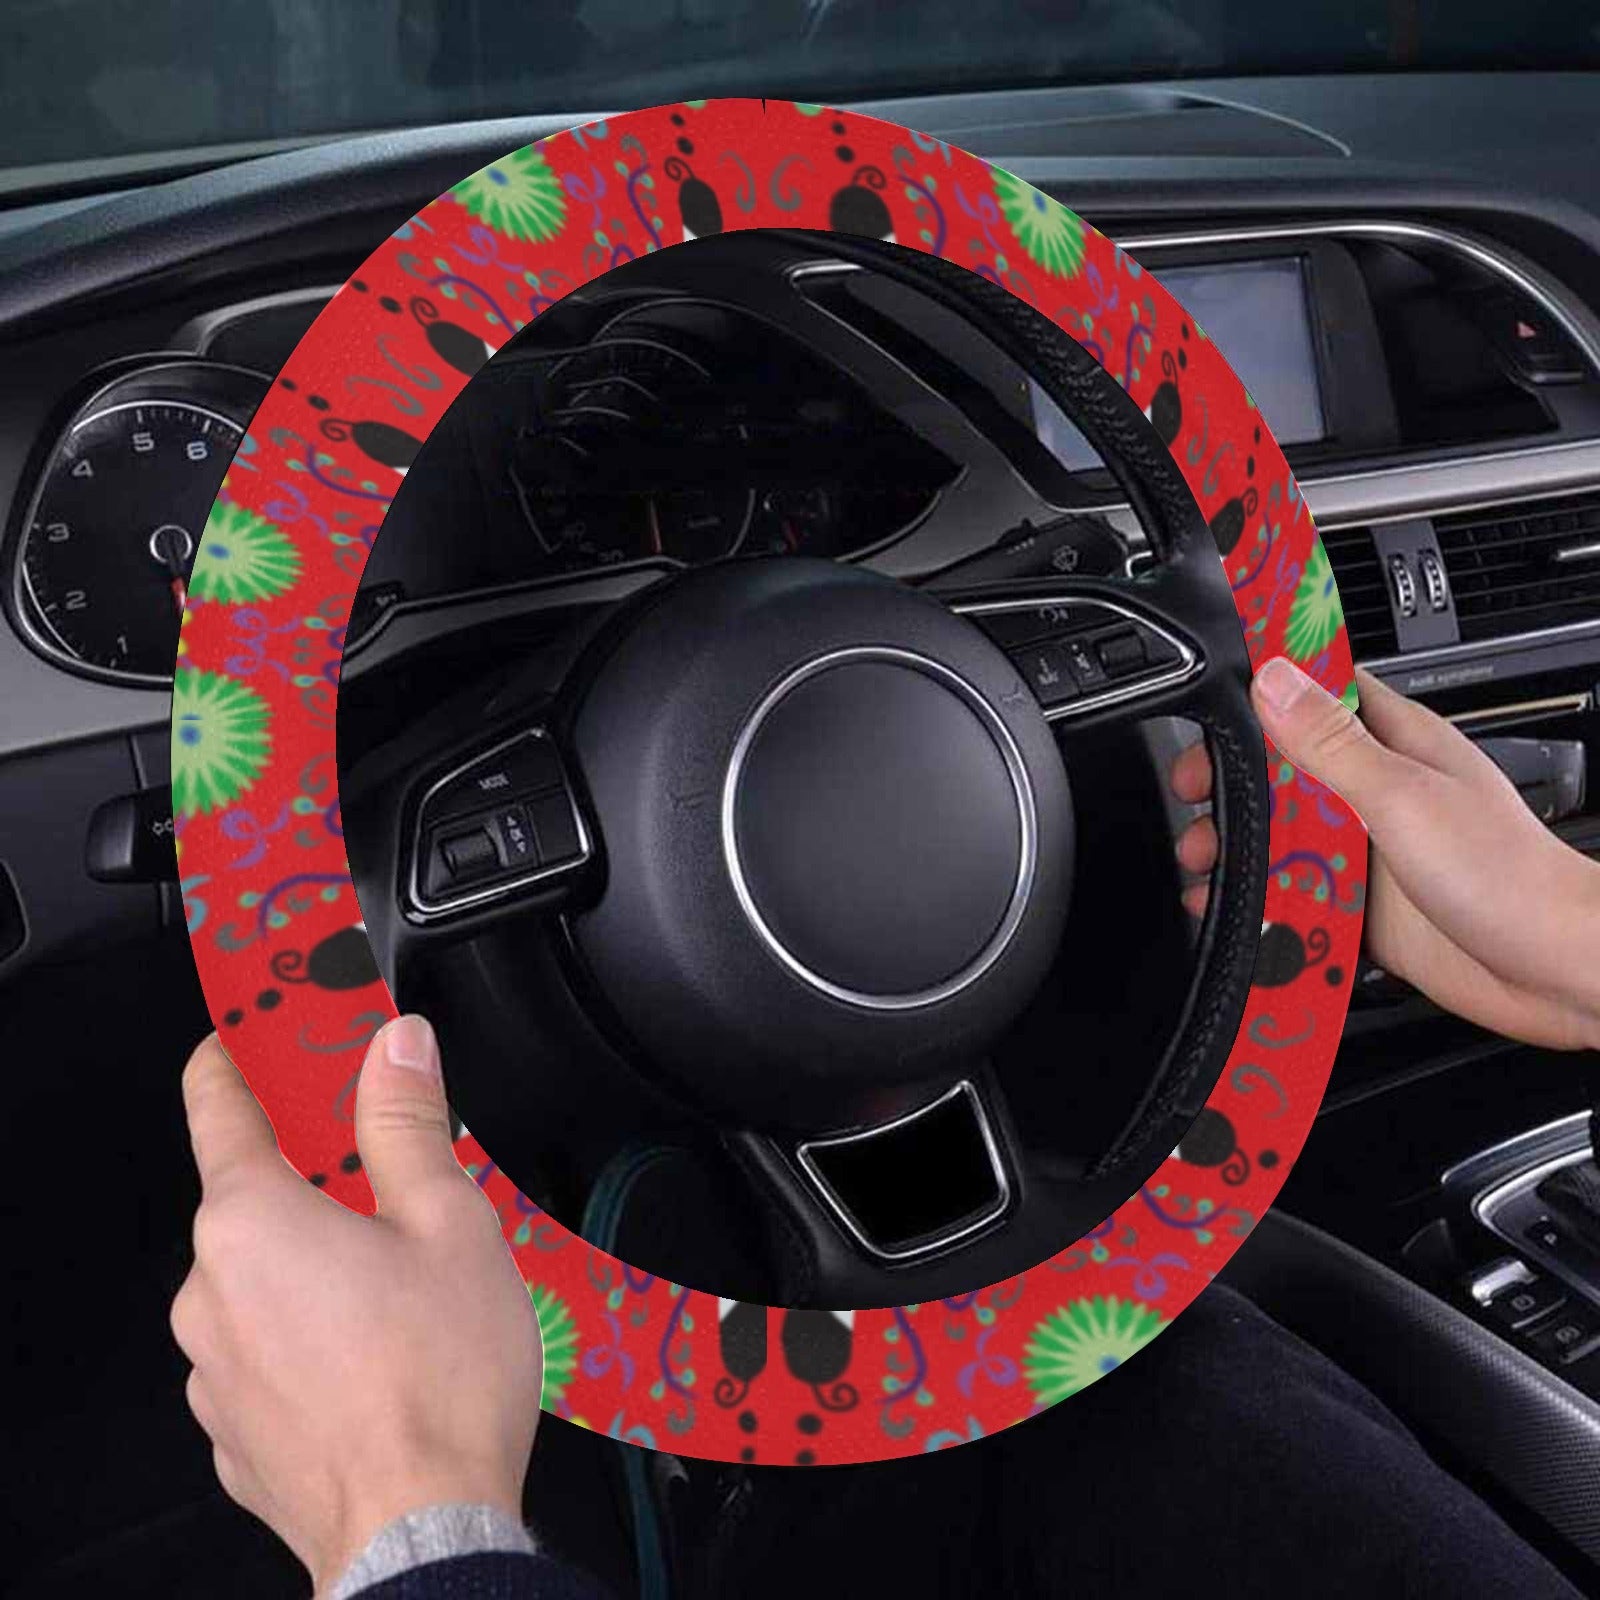 New Growth Vermillion Steering Wheel Cover with Elastic Edge